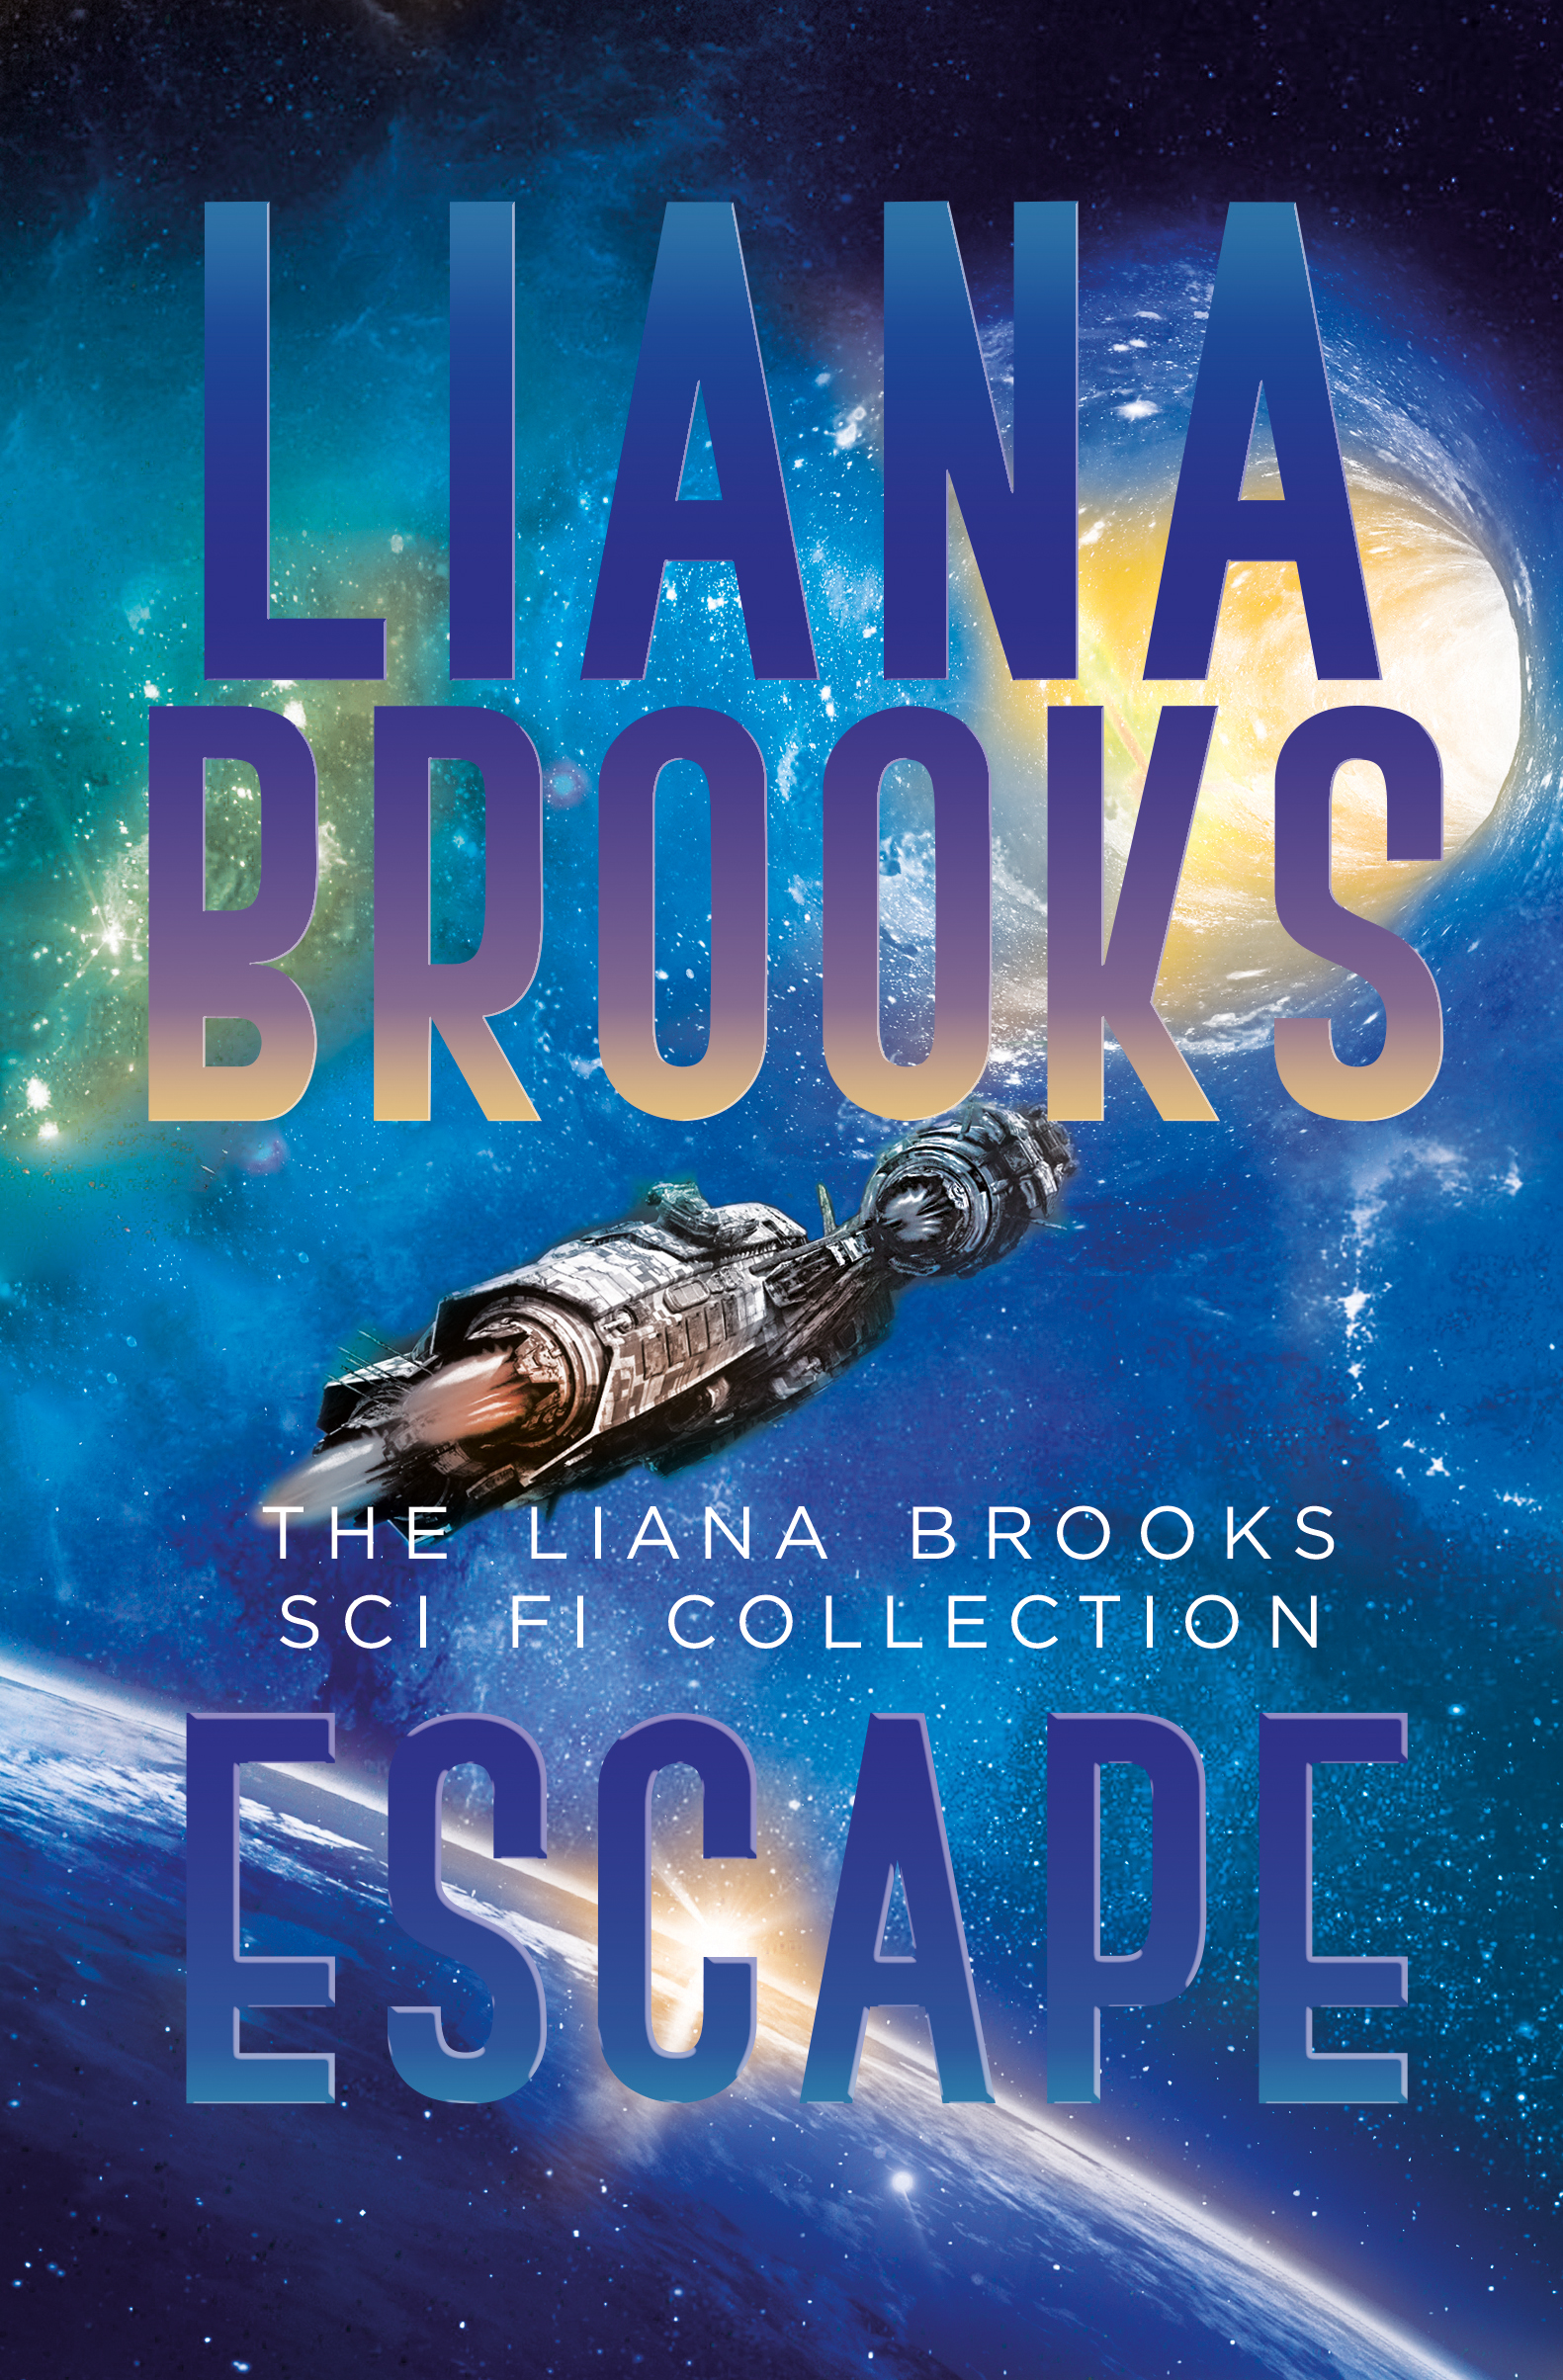 The cover art for ESCAPE showing a blue star-dappled background in space and a spaceship. 